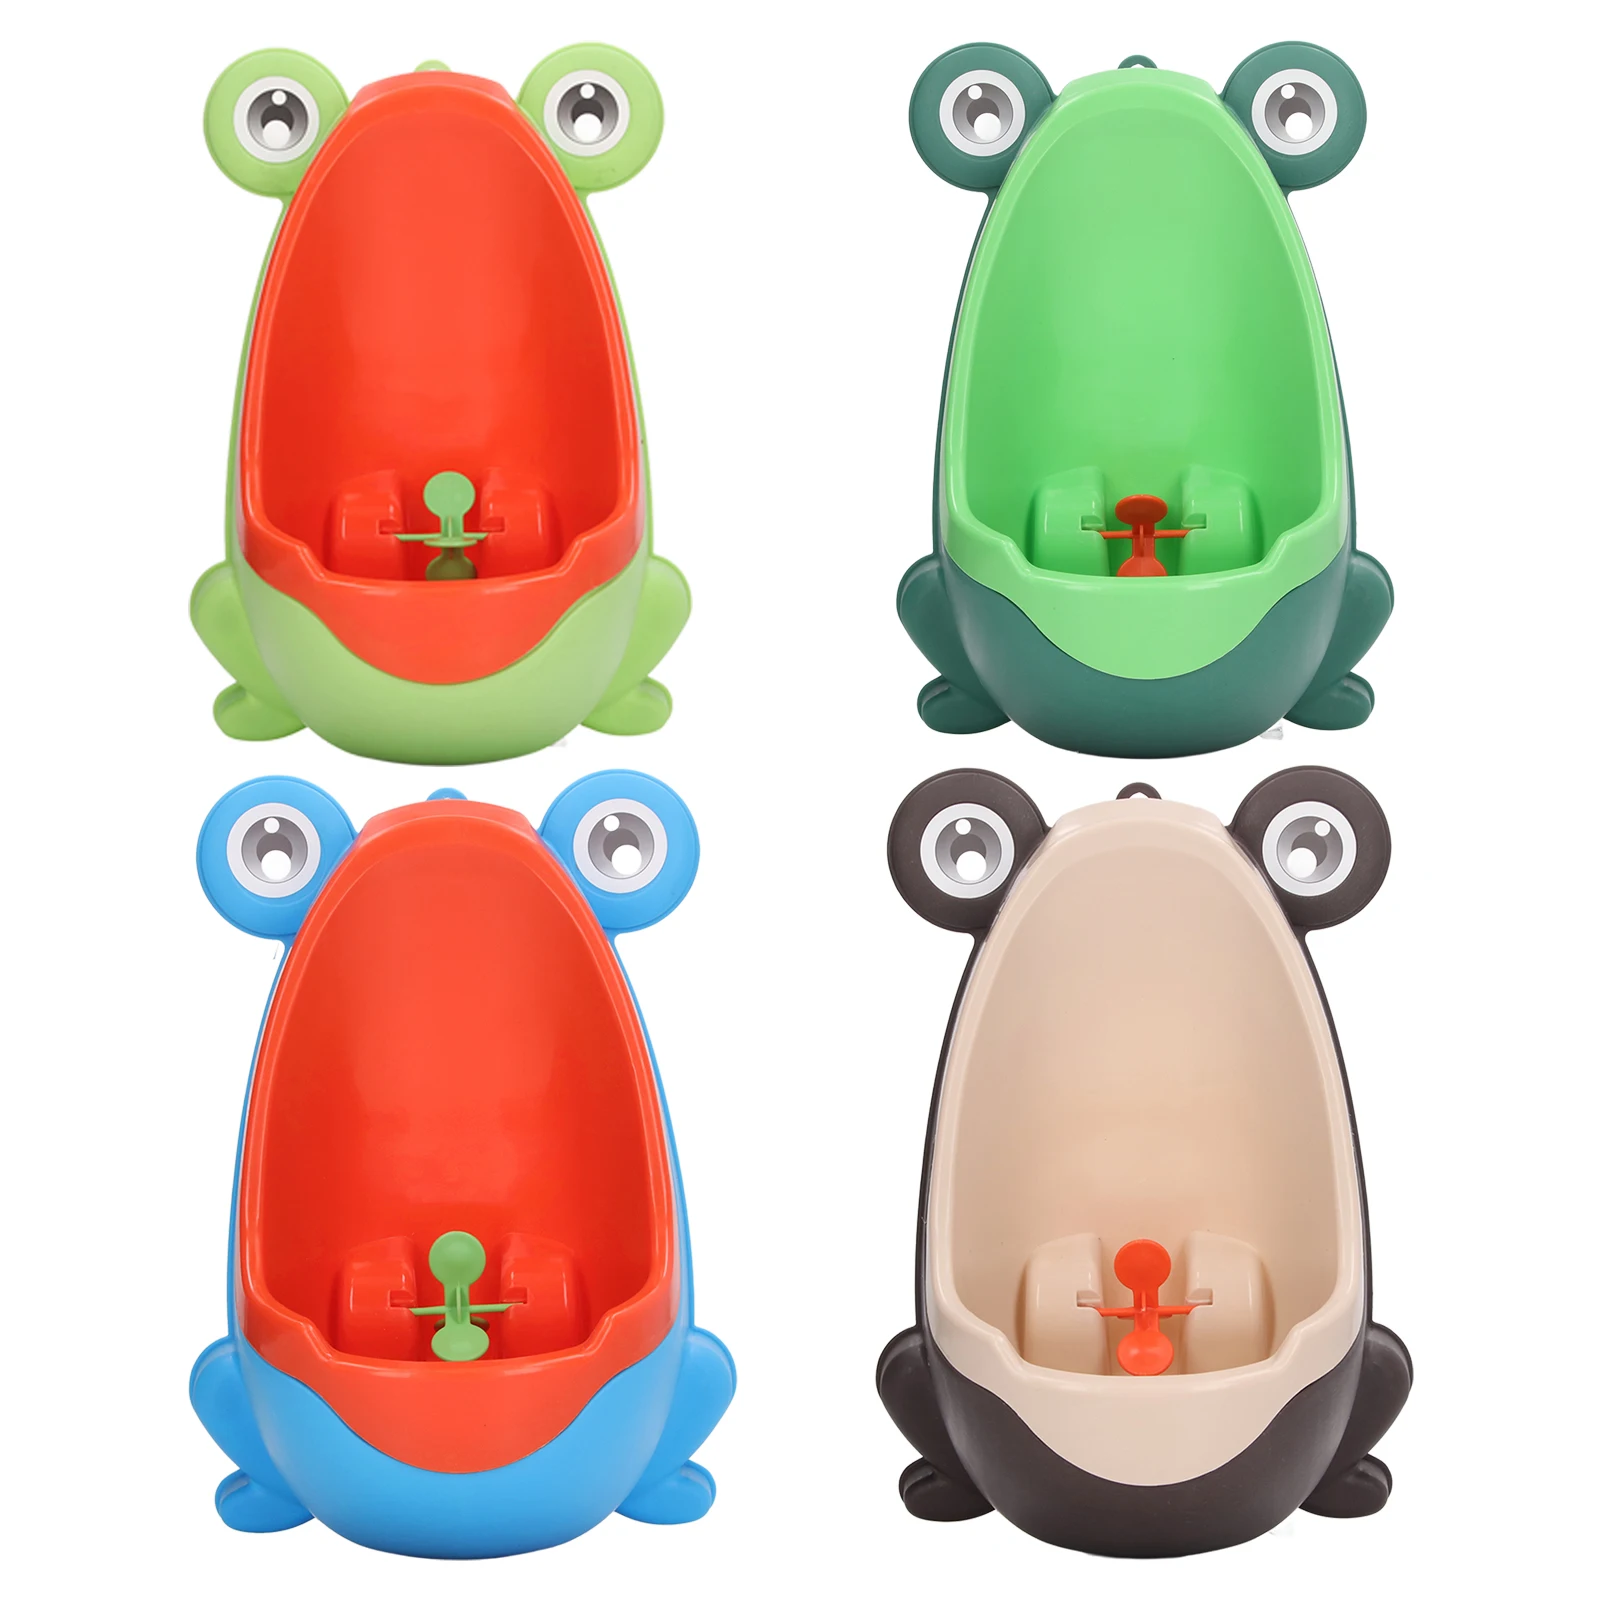 Baby Boys Standing Potty Shape Wall-Mounted Urinals Toilet Training Children Stand Vertical Urinal Potty baby boys standing potty frog shape wall mounted urinals toilet training children stand vertical urinal potty pee infant toddler